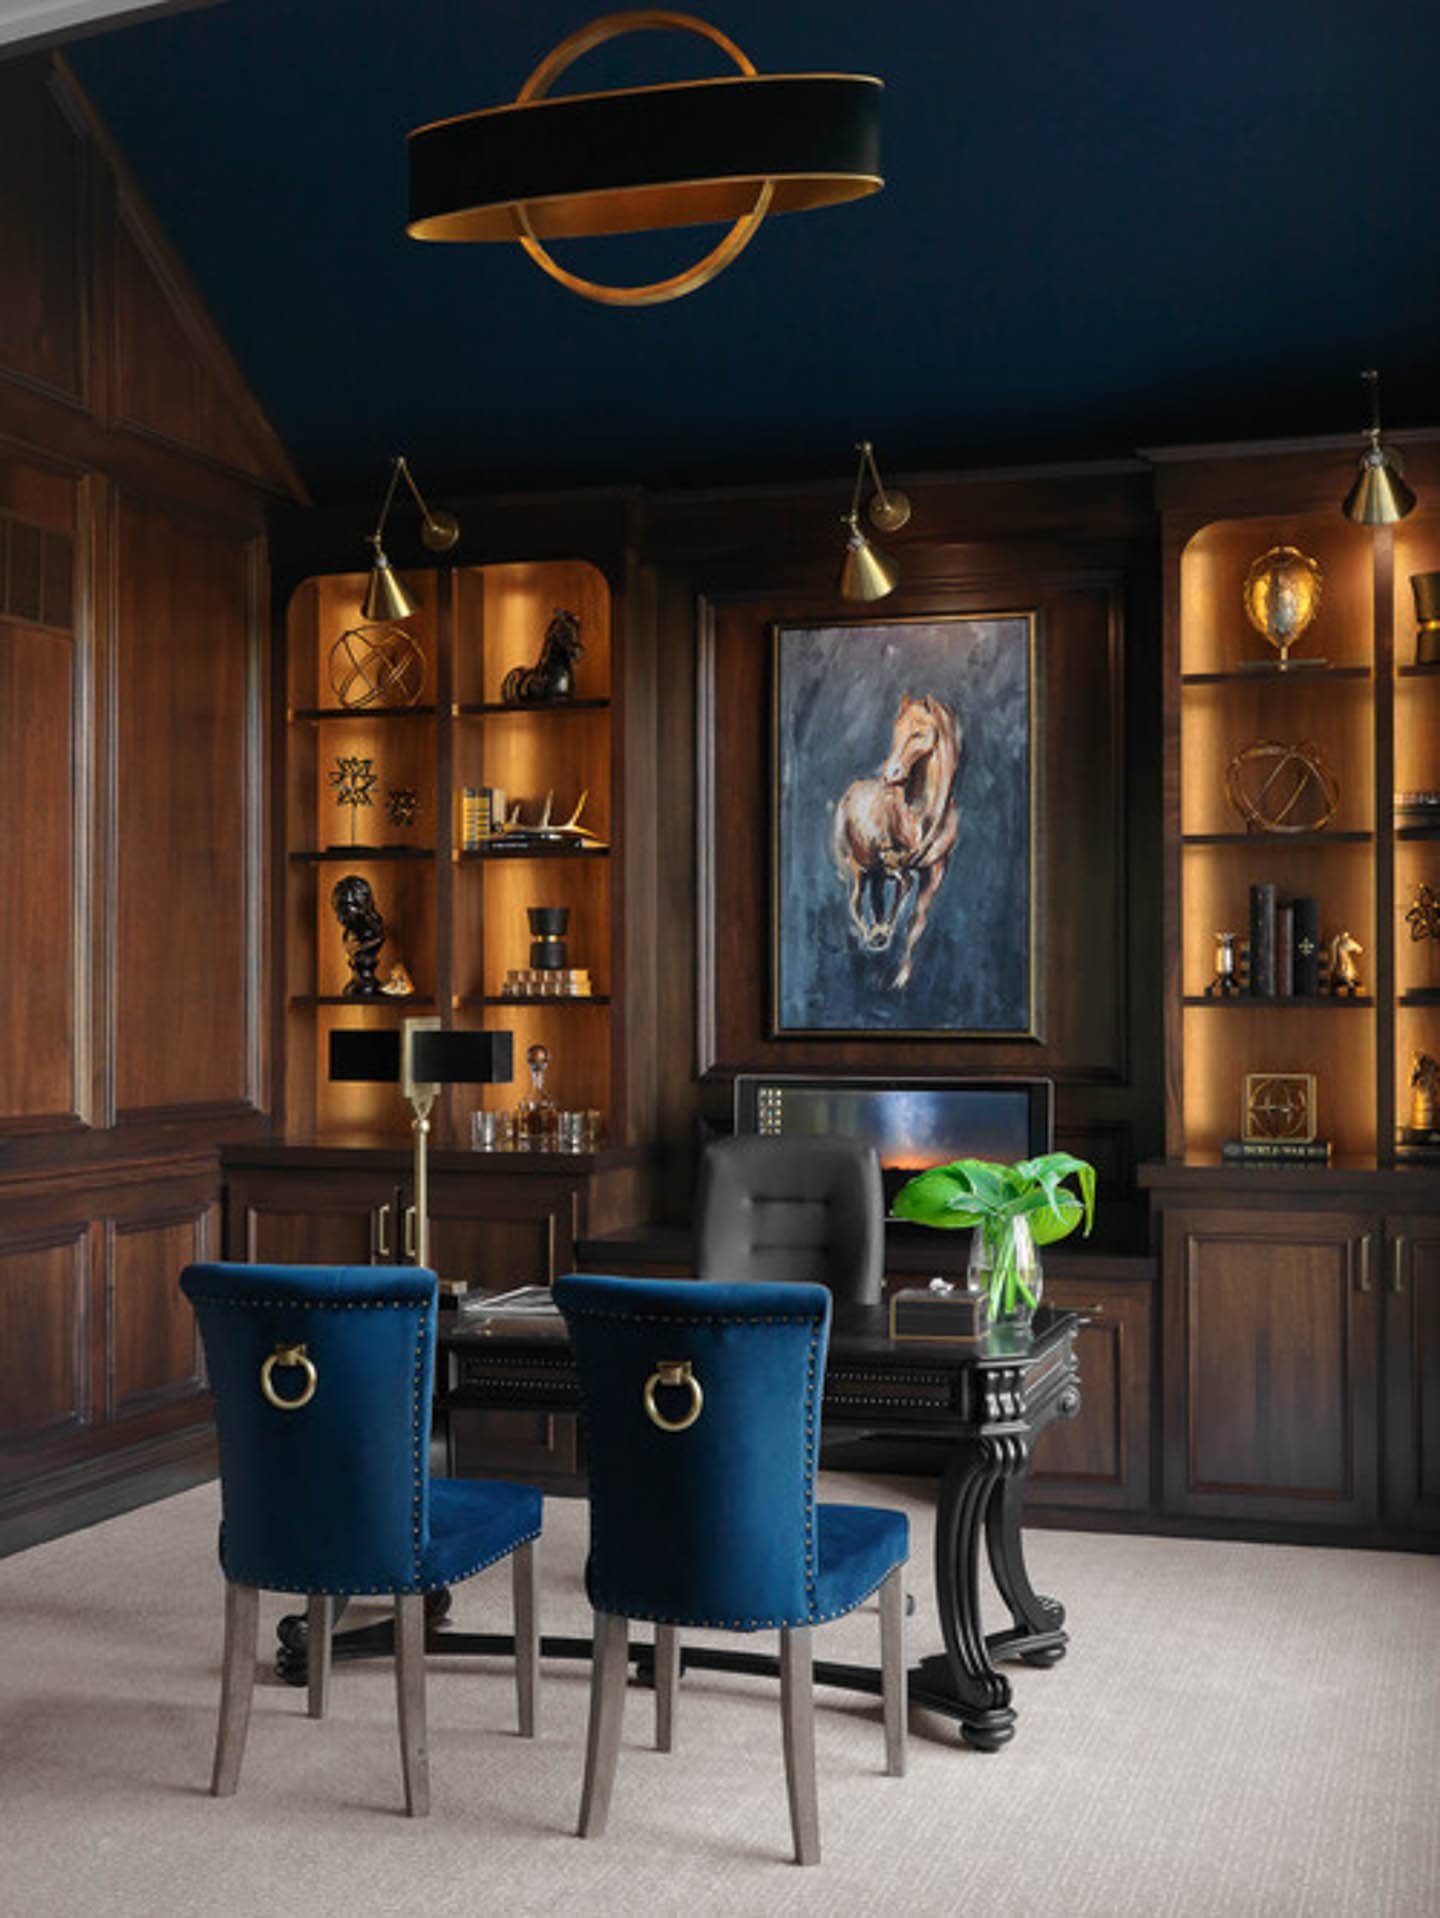 A traditional wood paneled office with blue chairs, painting and ceiling.